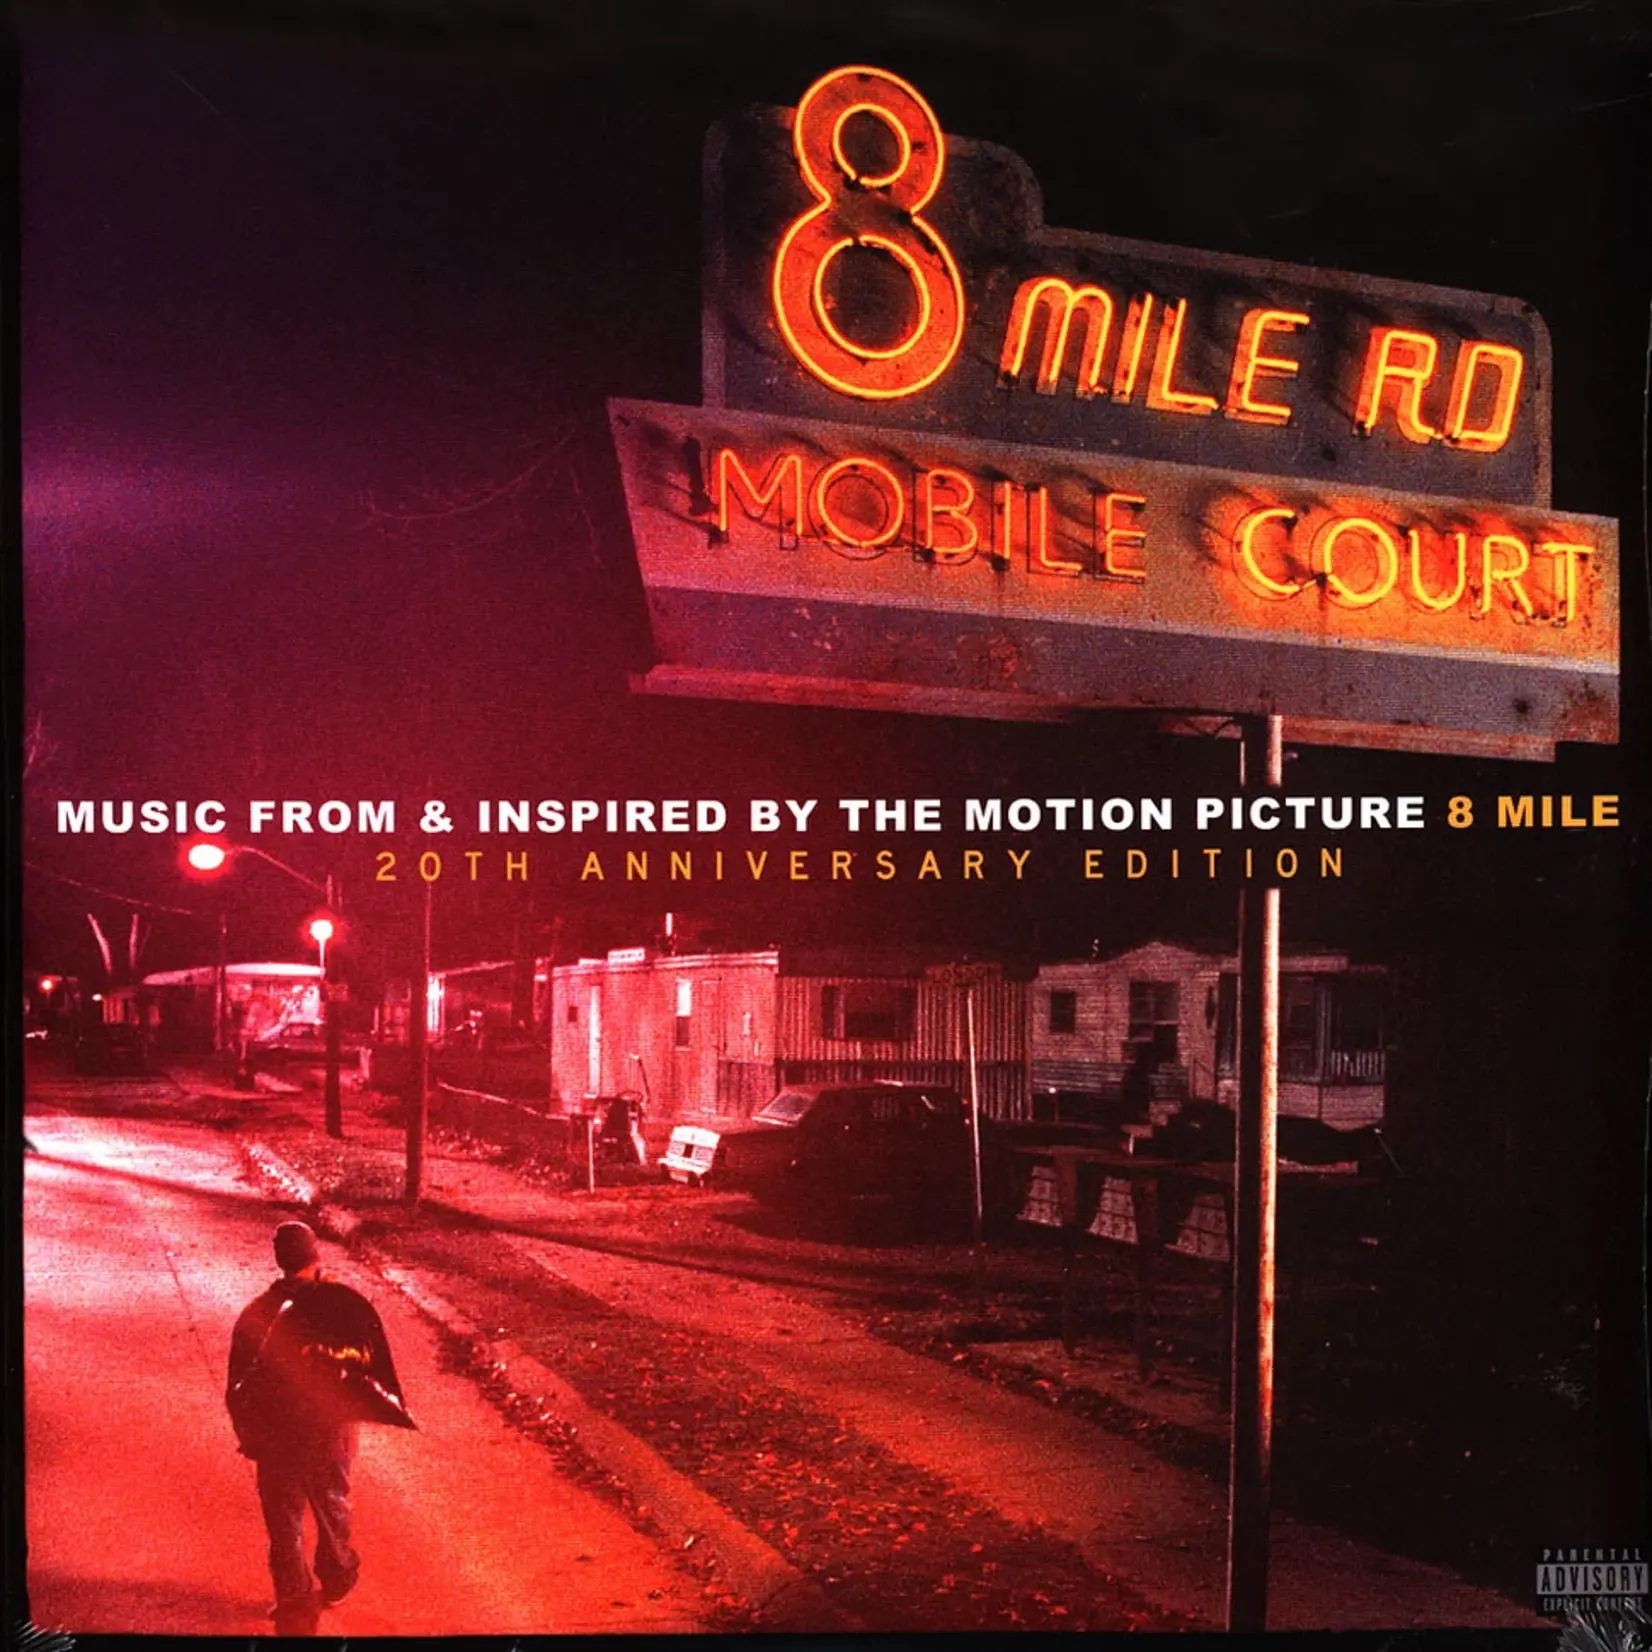 V/A - 8 Mile (Music From & Inspired By The Motion Picture) (20th Anniversary Edition)